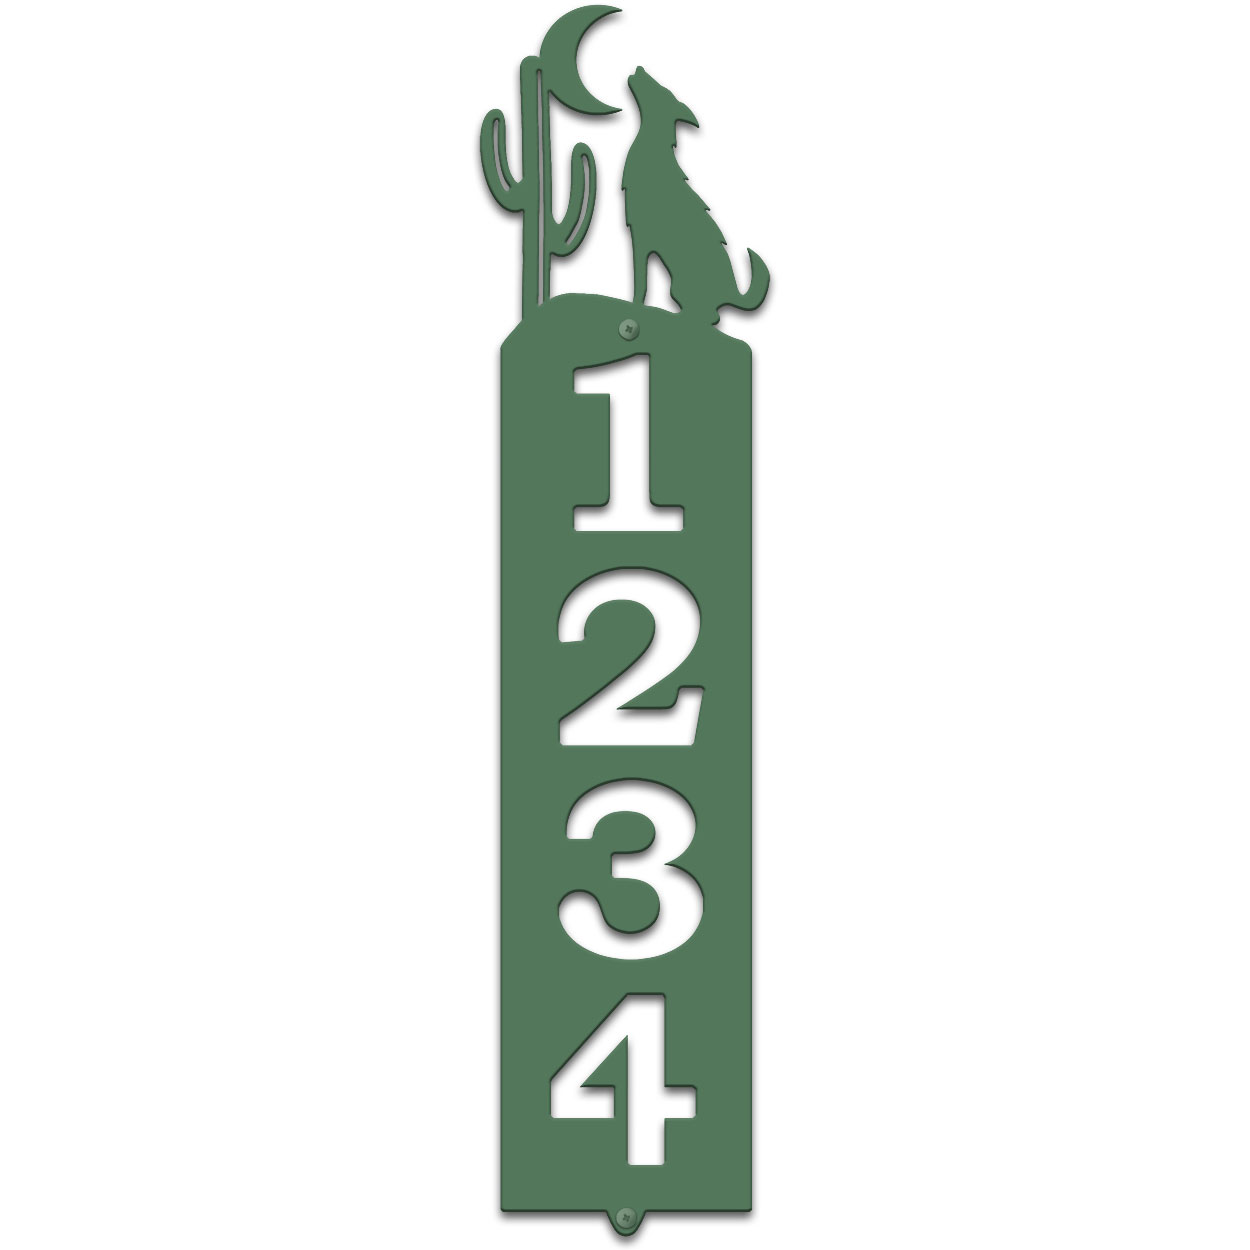 635094 - Howling Coyote Cut-Outs Four Digit Address Number Plaque - Choose Size and Color